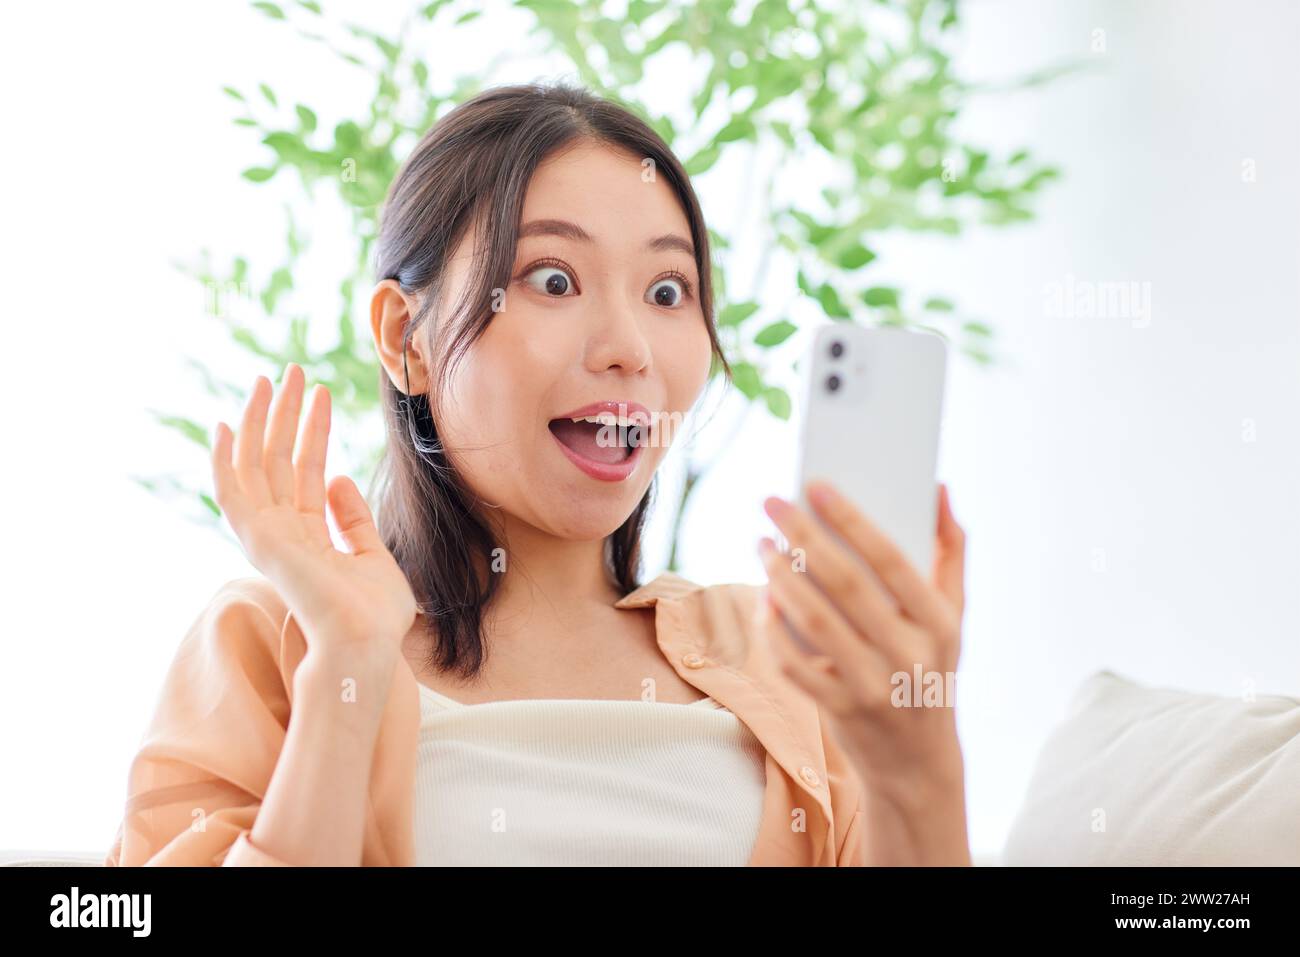 A woman holding a cell phone and looking surprised Stock Photo